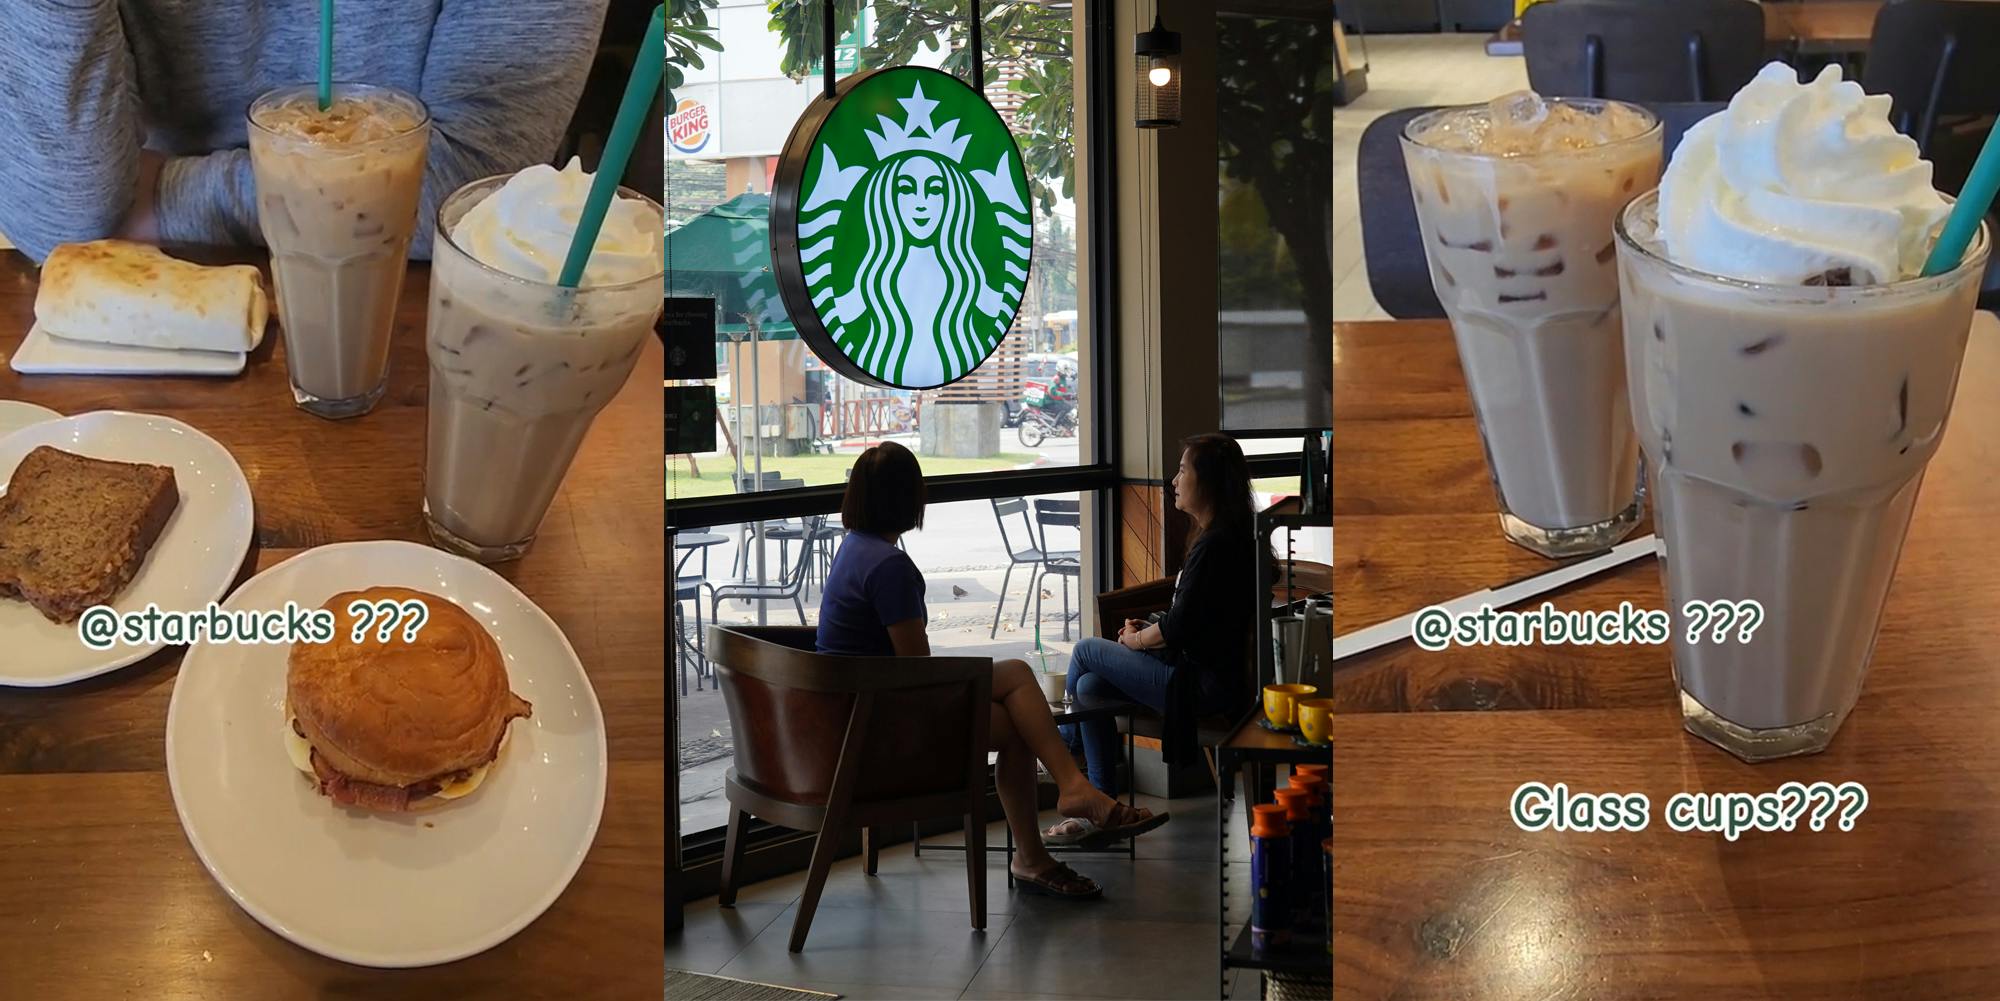 Starbucks customers seated at table with drinks in glass cups with caption "@starbucks???" (l) Starbucks interior with customers seated underneath sign (c) Starbucks drinks on table in glass cups with caption "@starbucks??? Glass cups???" (r)